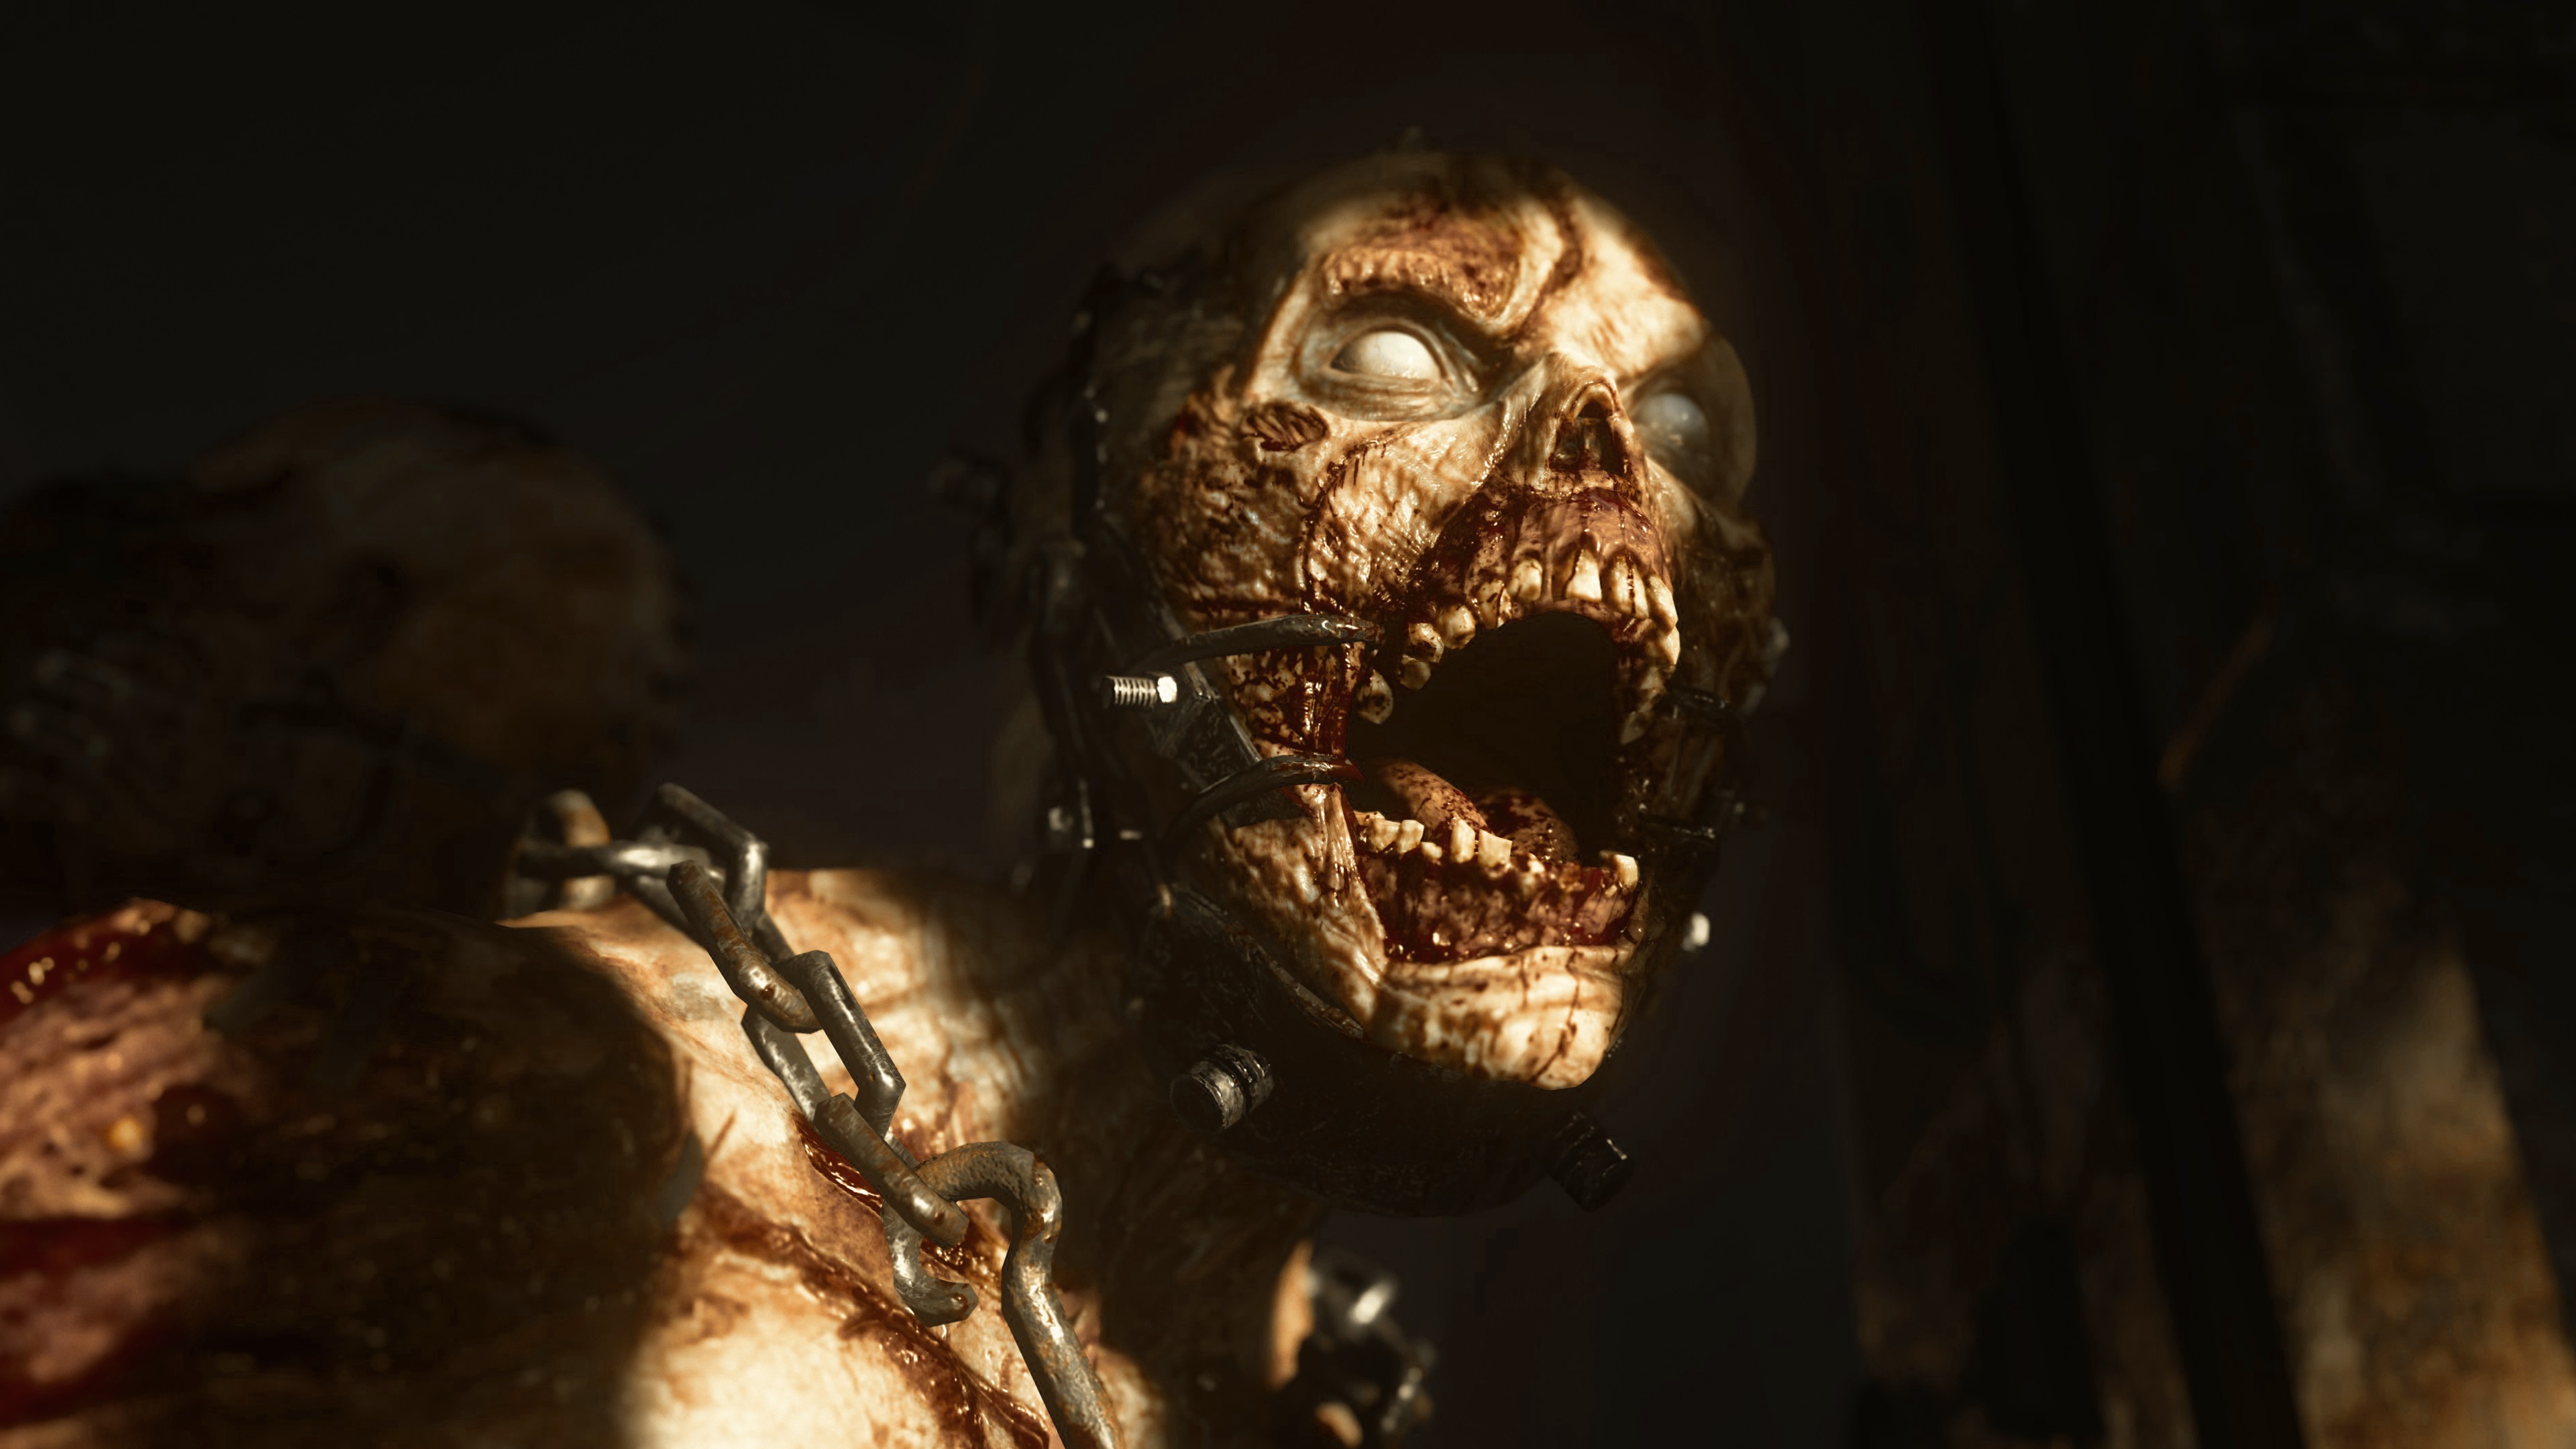 CoD: Vanguard Zombies mode developed by Treyarch; continues Cold War story  - Charlie INTEL